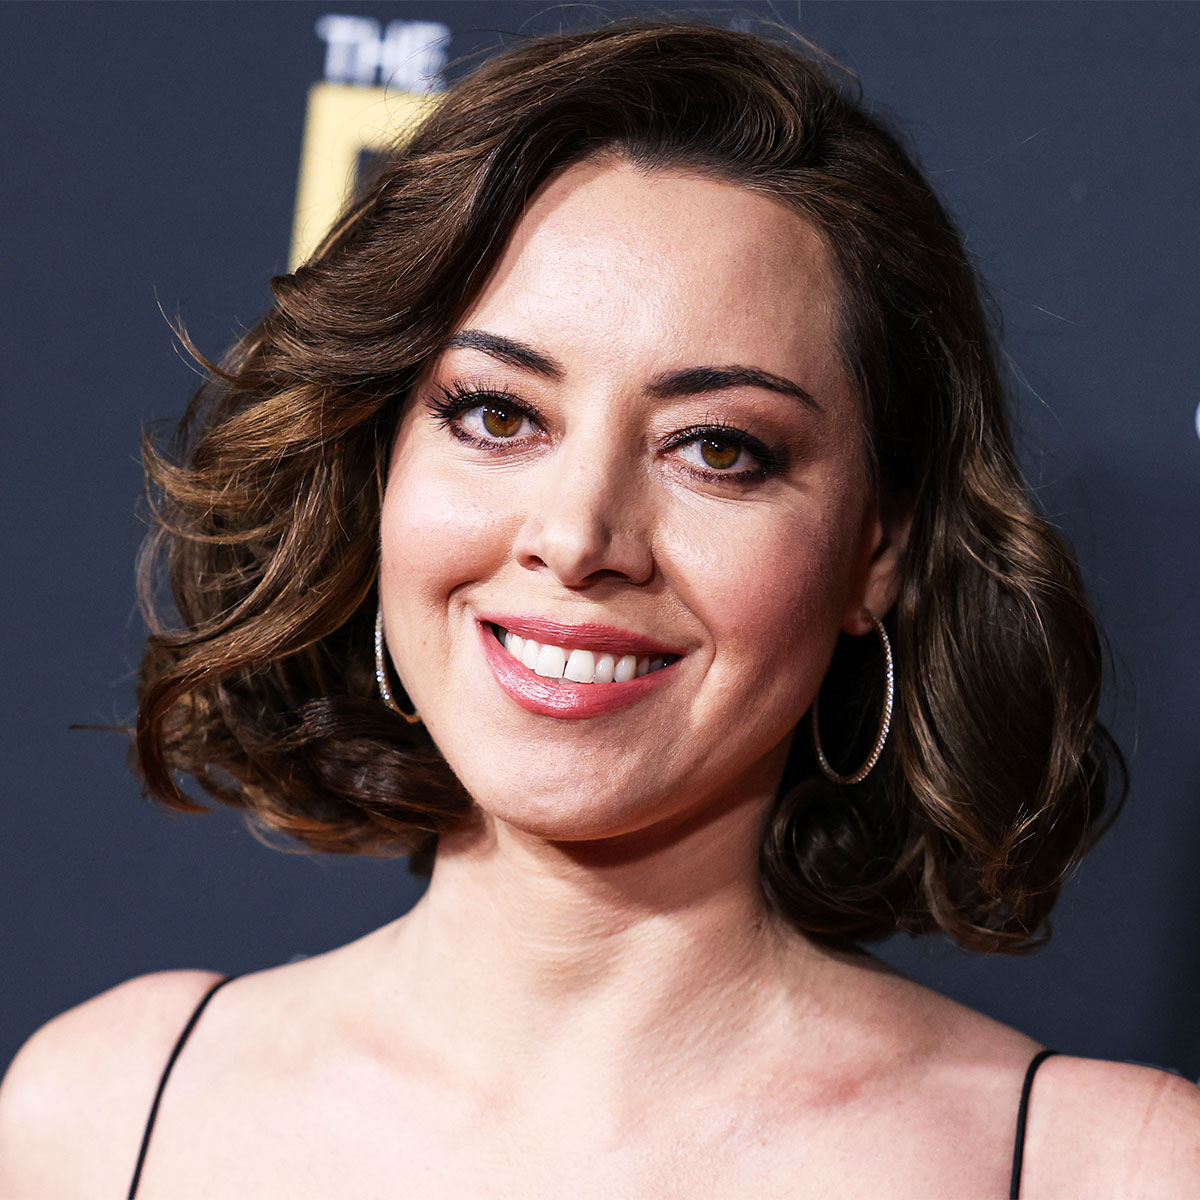 Aubrey Plaza Has Toned Abs, Legs In 'The White Lotus' Event Pics